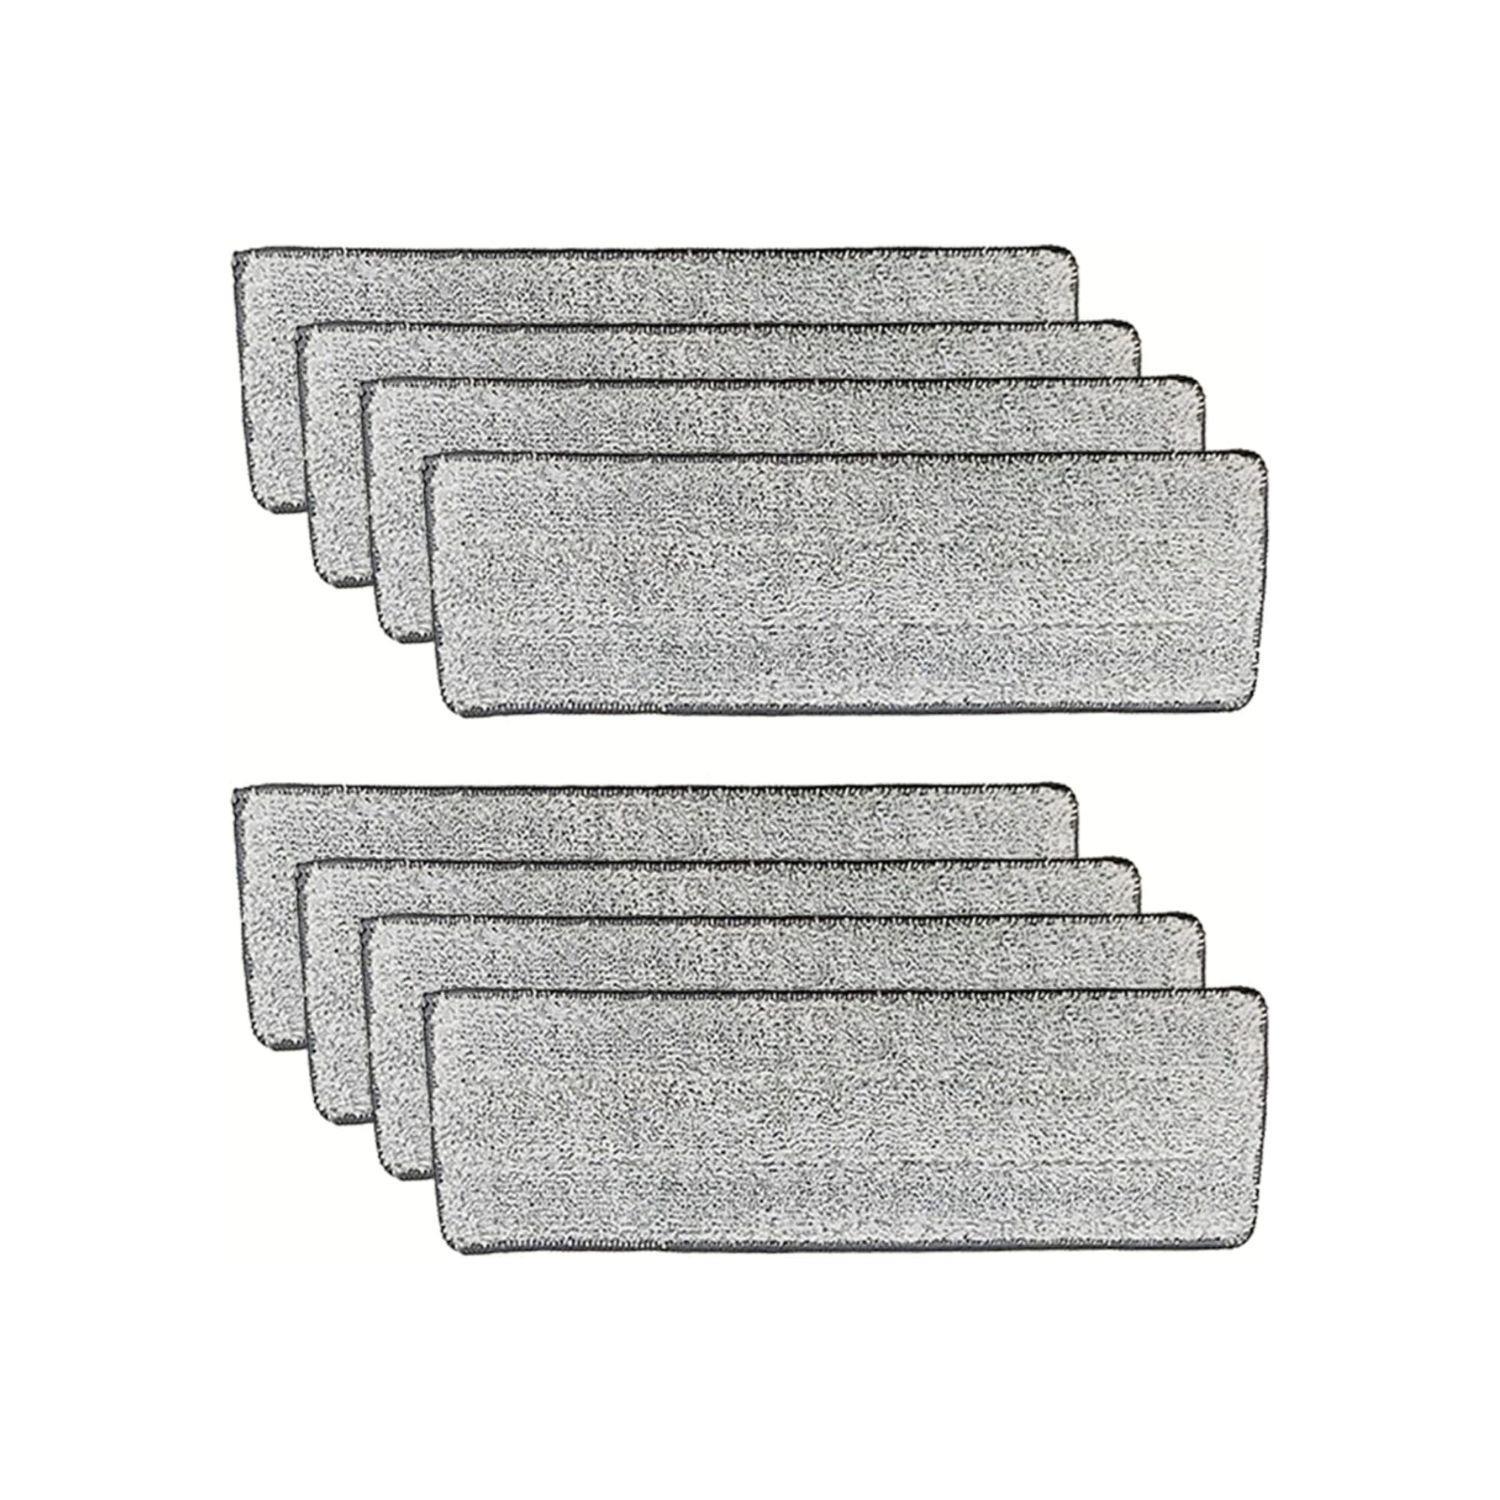 GOMINIMO Flat Mop Soft Durable Reusable Microfiber Replacement Pads 8 Pack